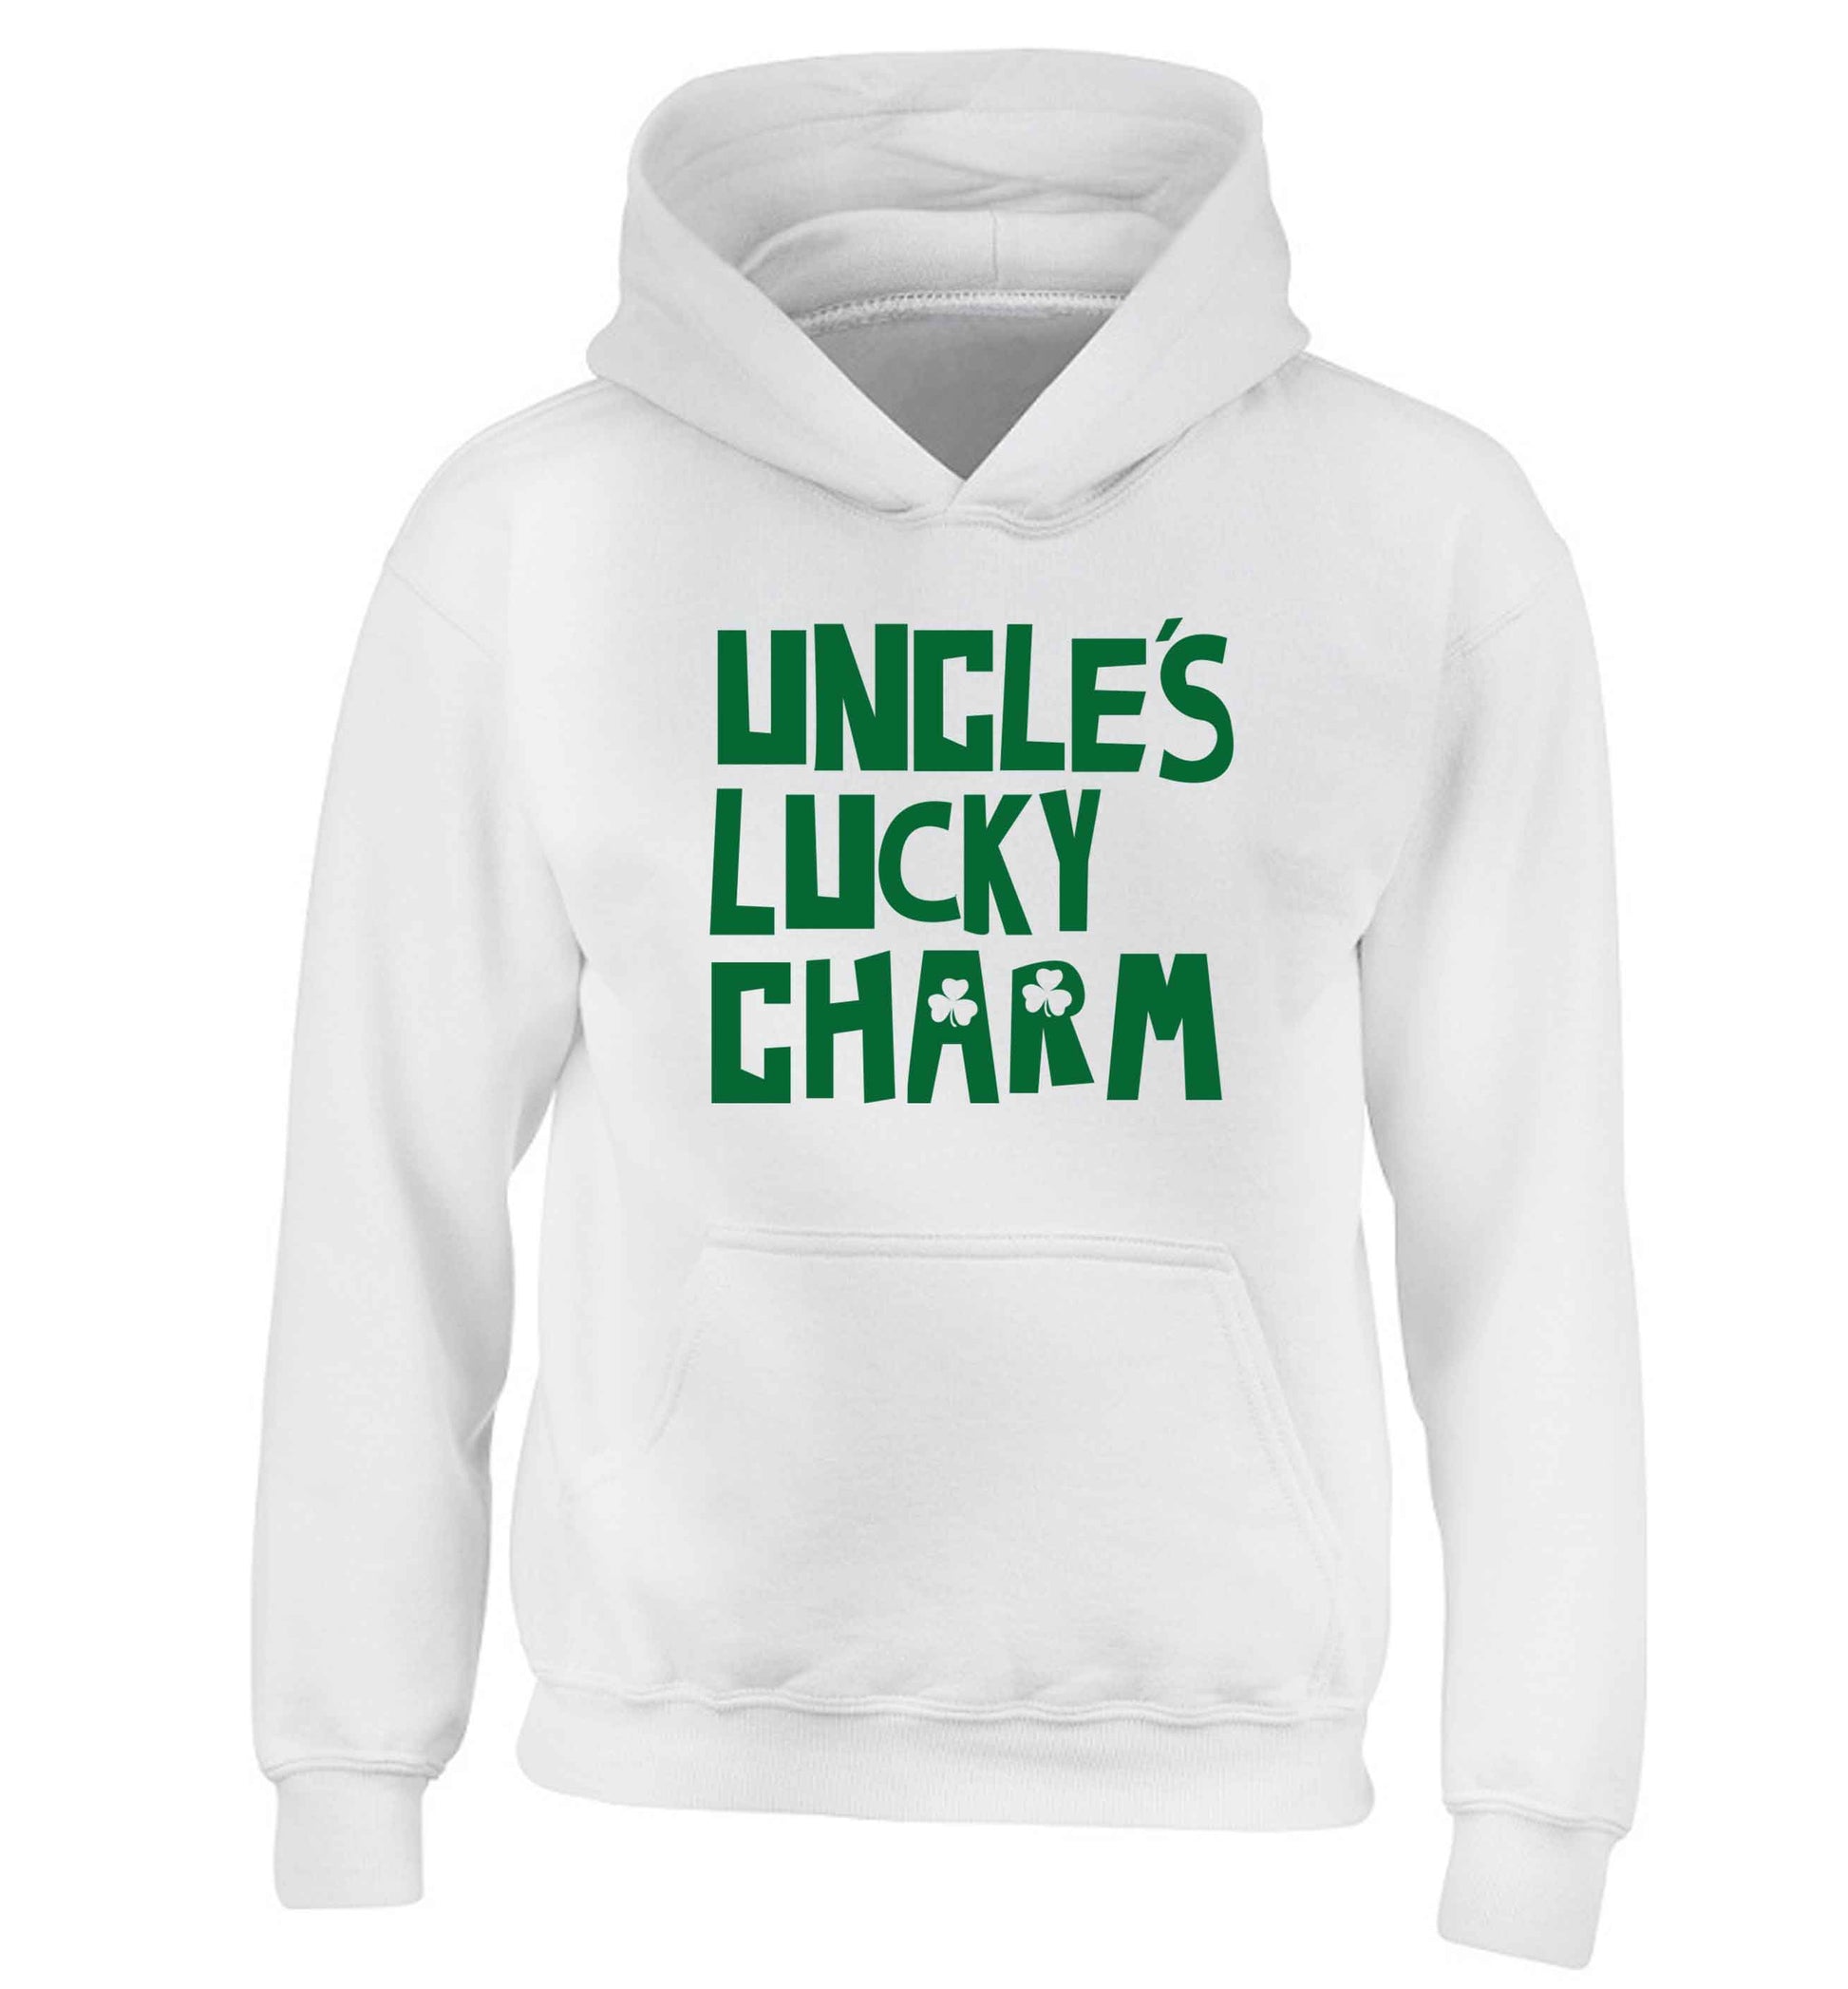 Uncles lucky charm children's white hoodie 12-13 Years